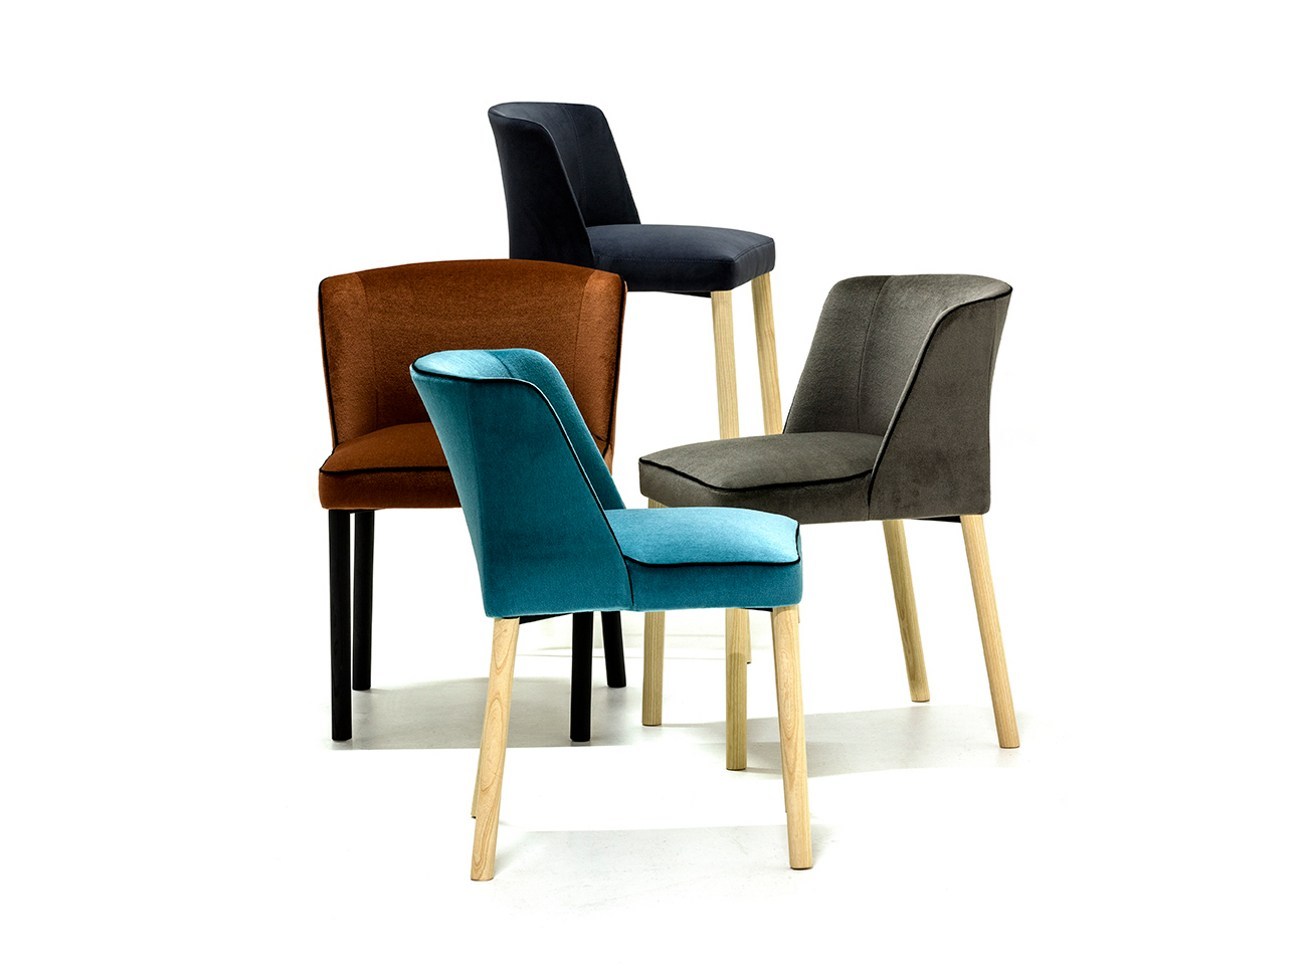 Virginia Chairs by Ludovica + Roberto Palomba for Arrmet